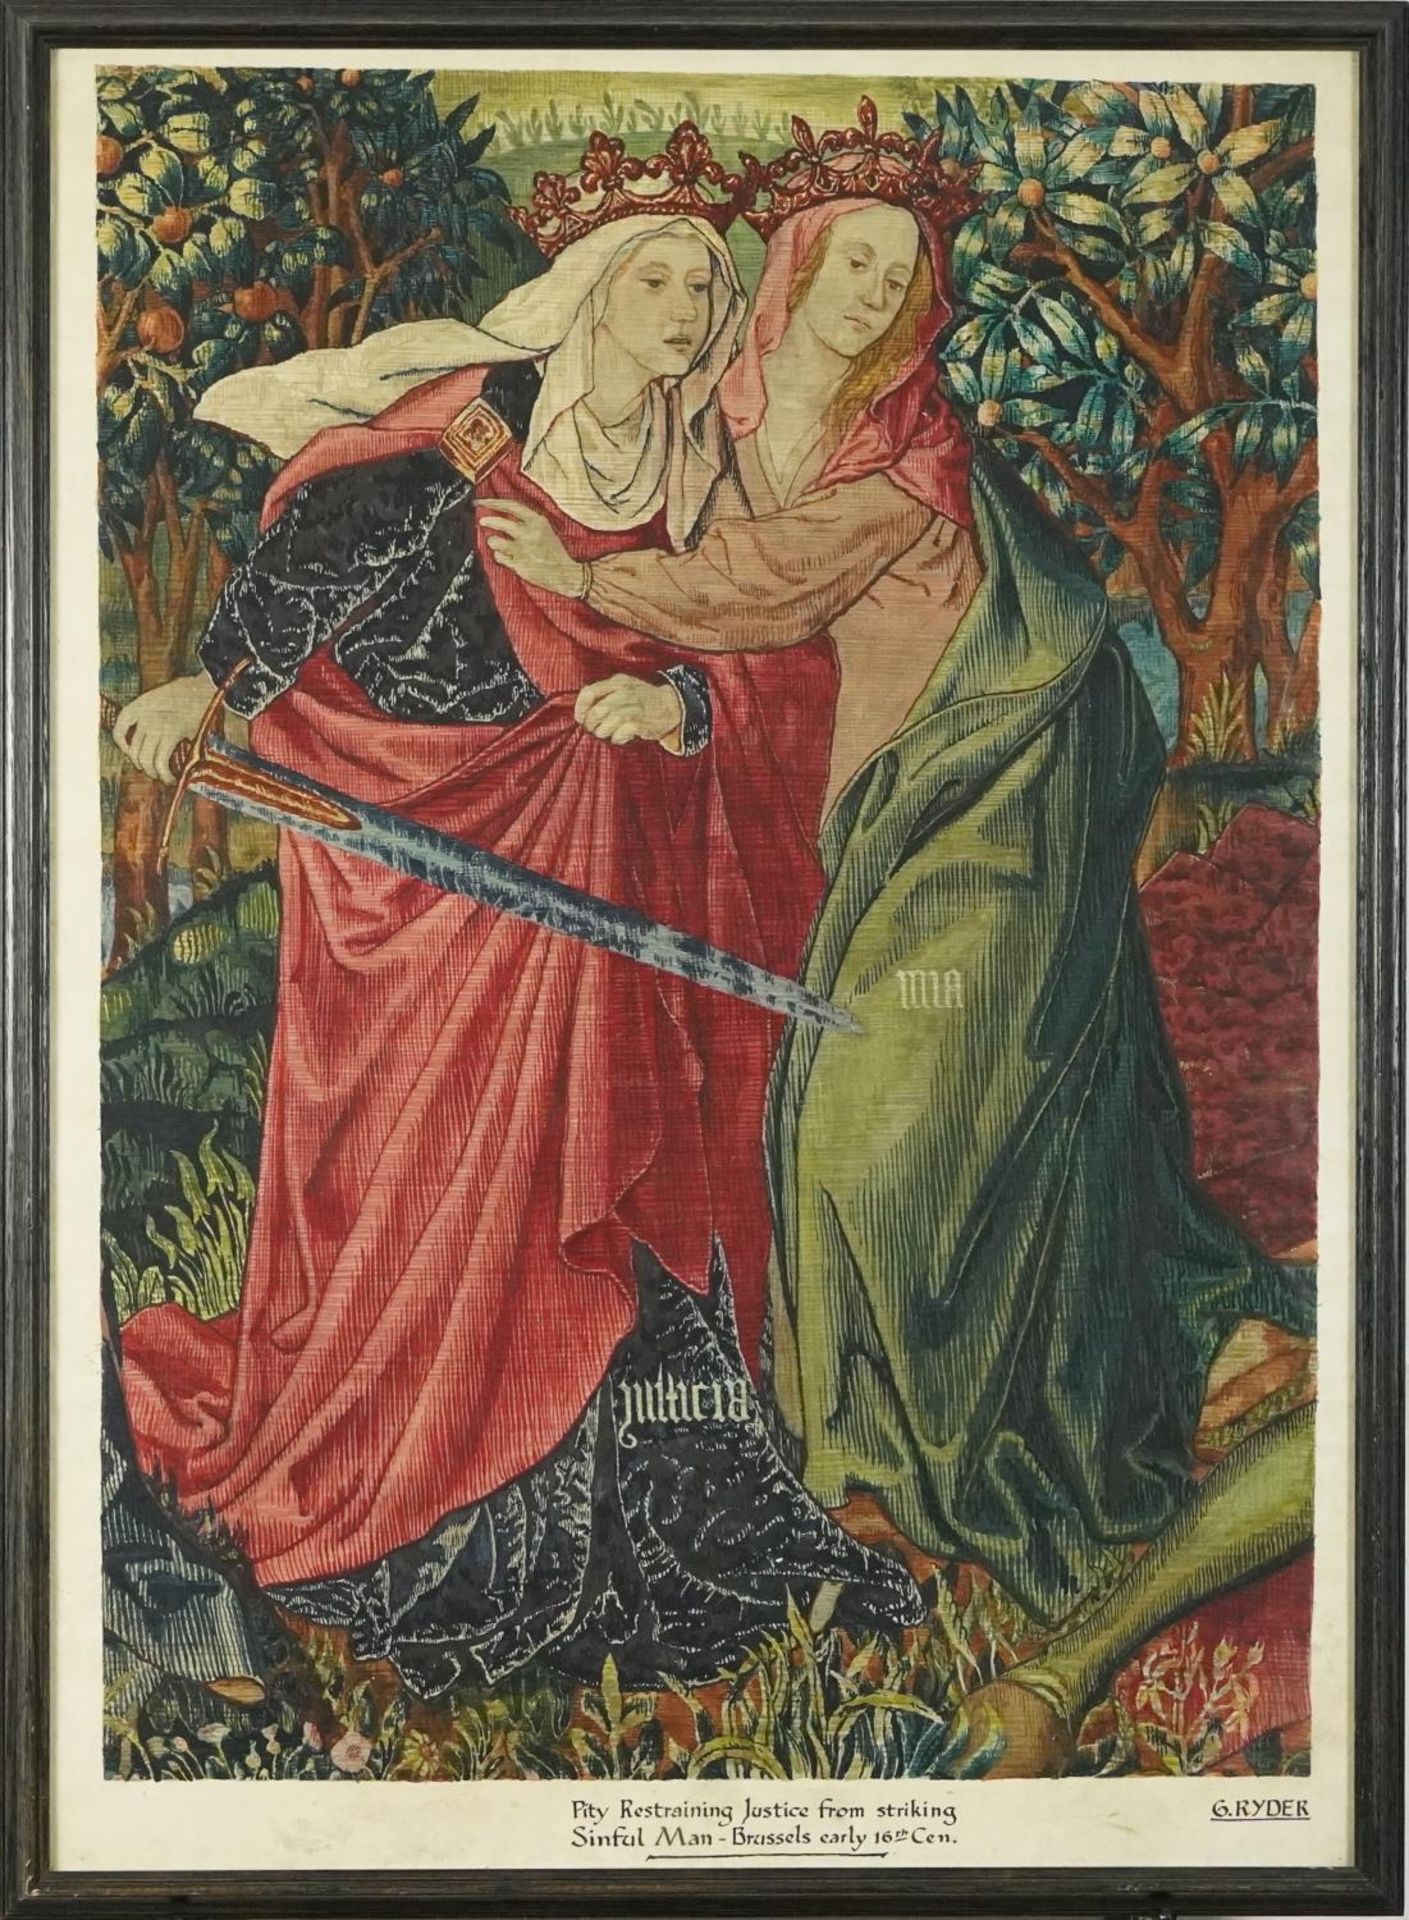 G Ryder - Pity Restraining Justice Striking Sinful Man Brussels early 16th century, Pre-Raphaelite - Image 2 of 5